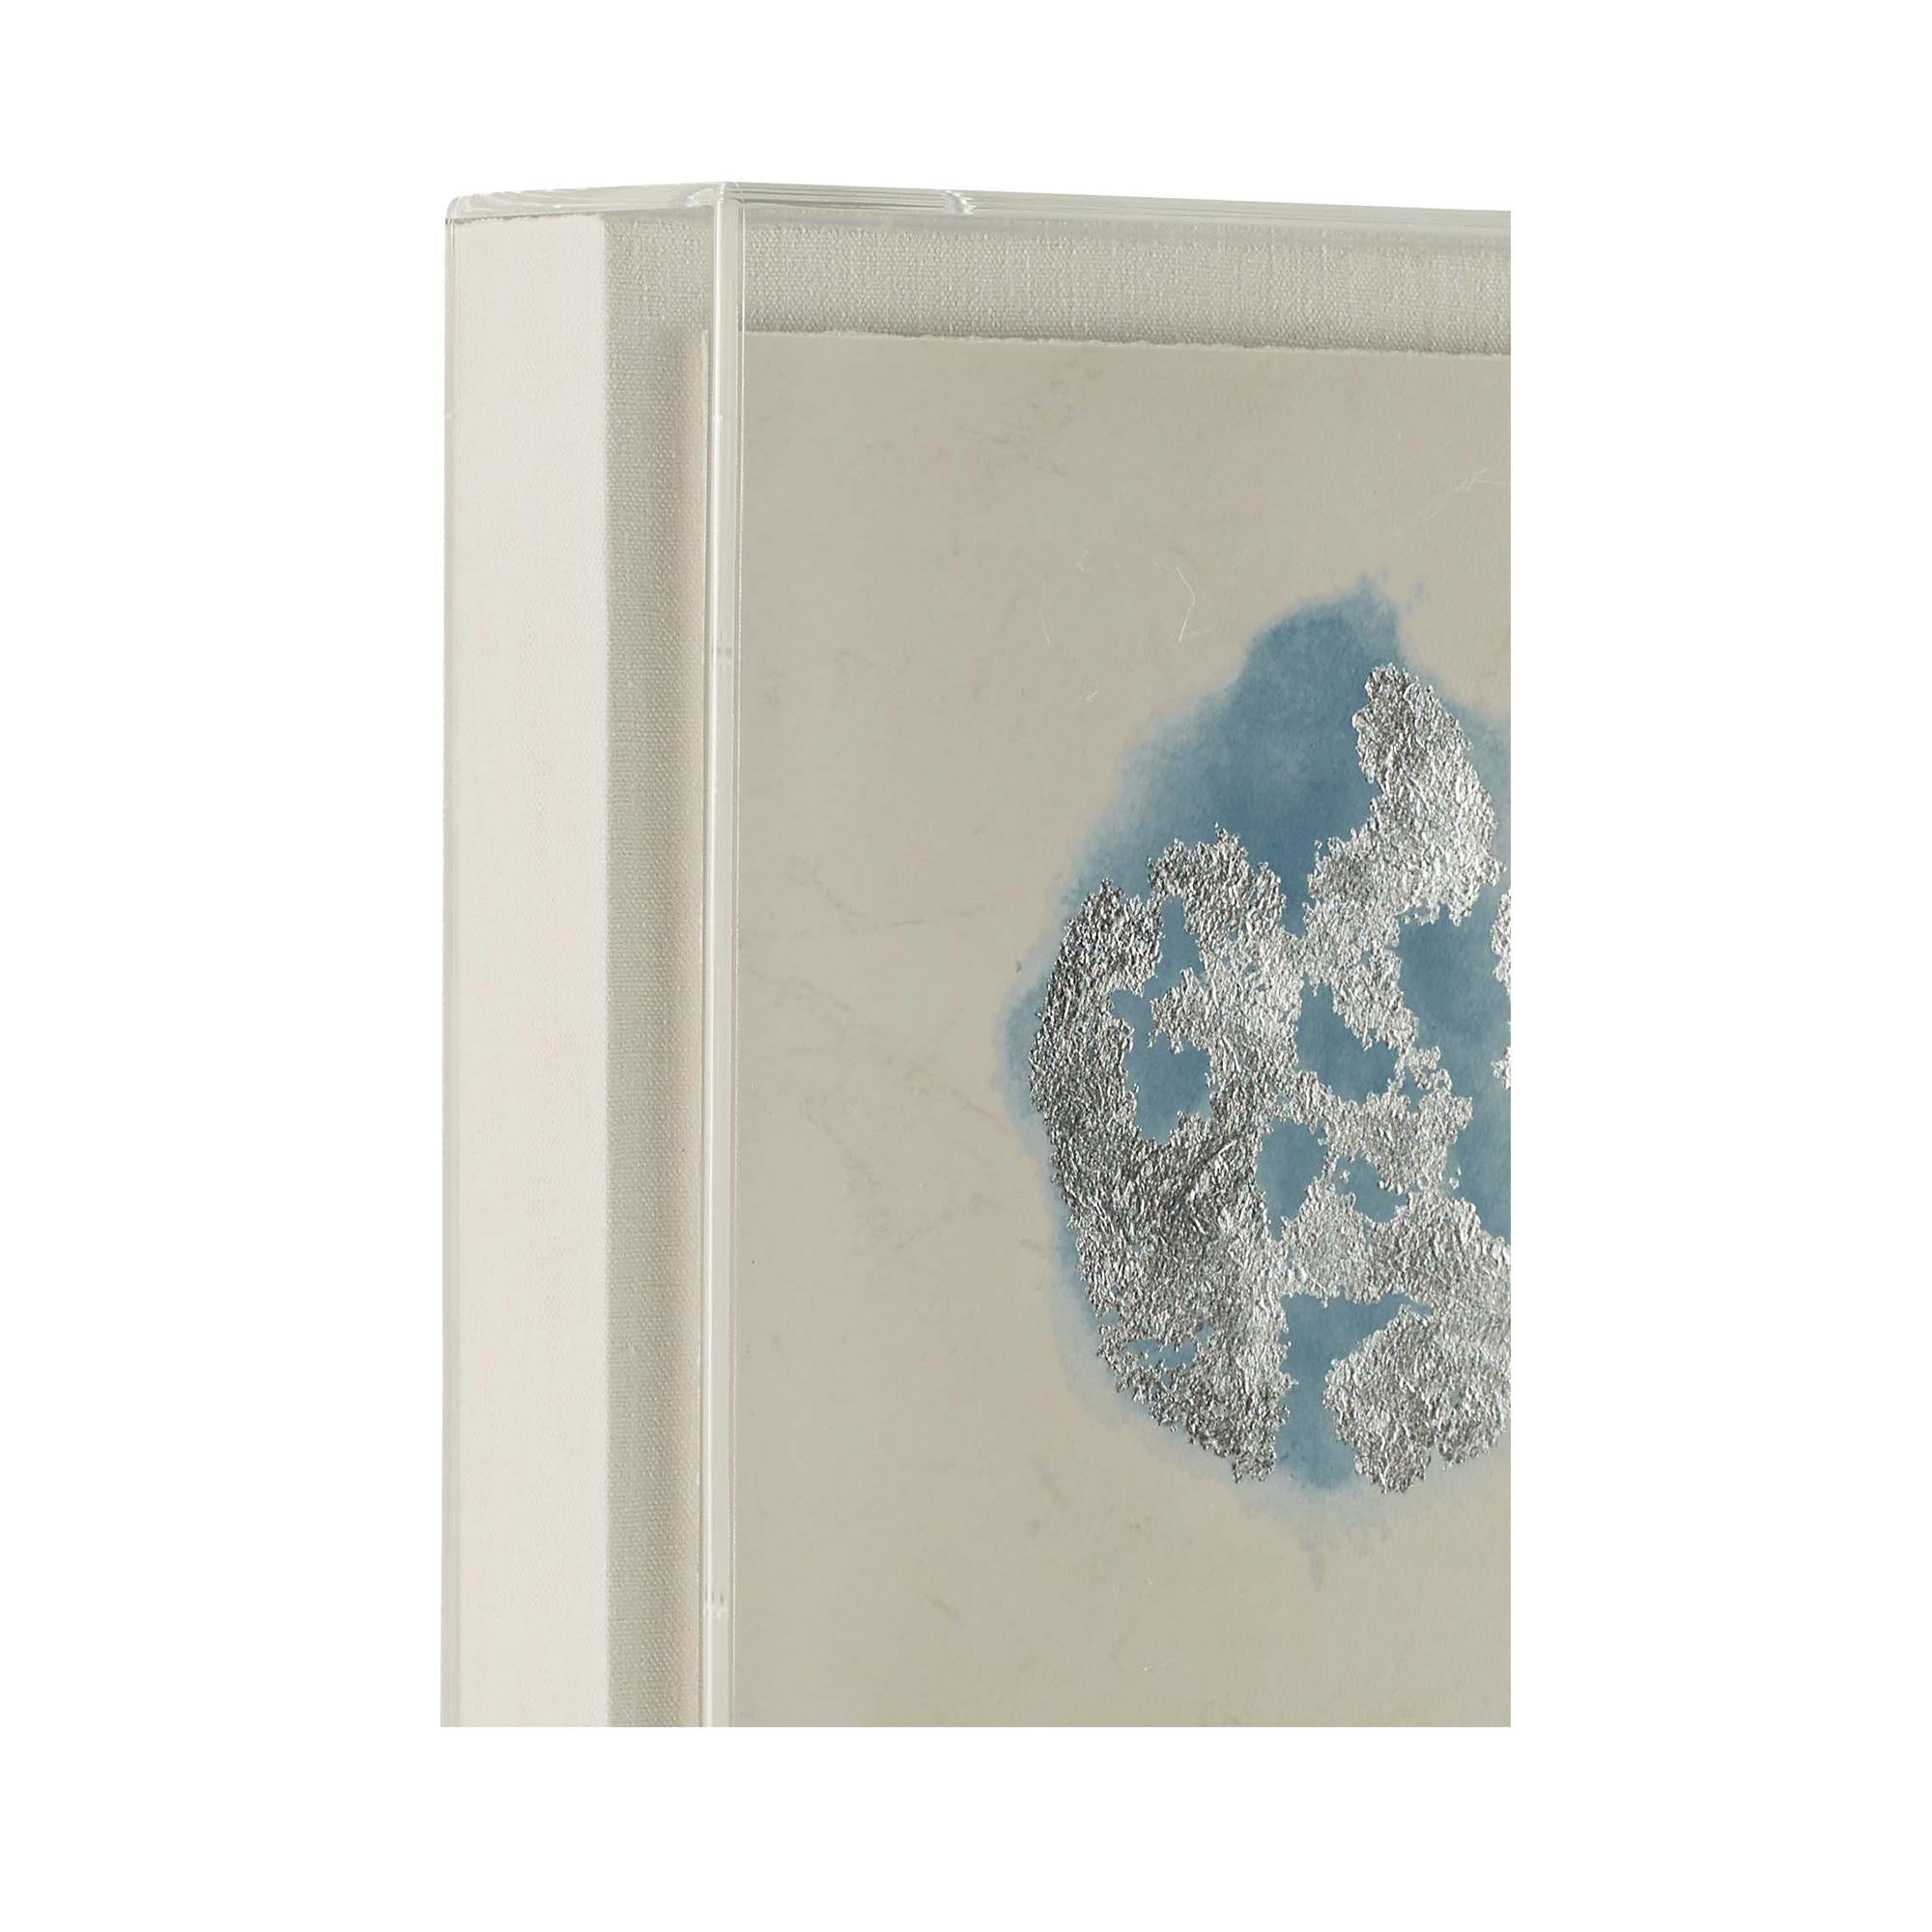 Color Island Series is playful in color and vibrancy. Created with layers of silver leaf over color inks on an aged paper background, the splashes of silver leaf over light powder blue, iris blue, and slate add excitement to the antiqued background.